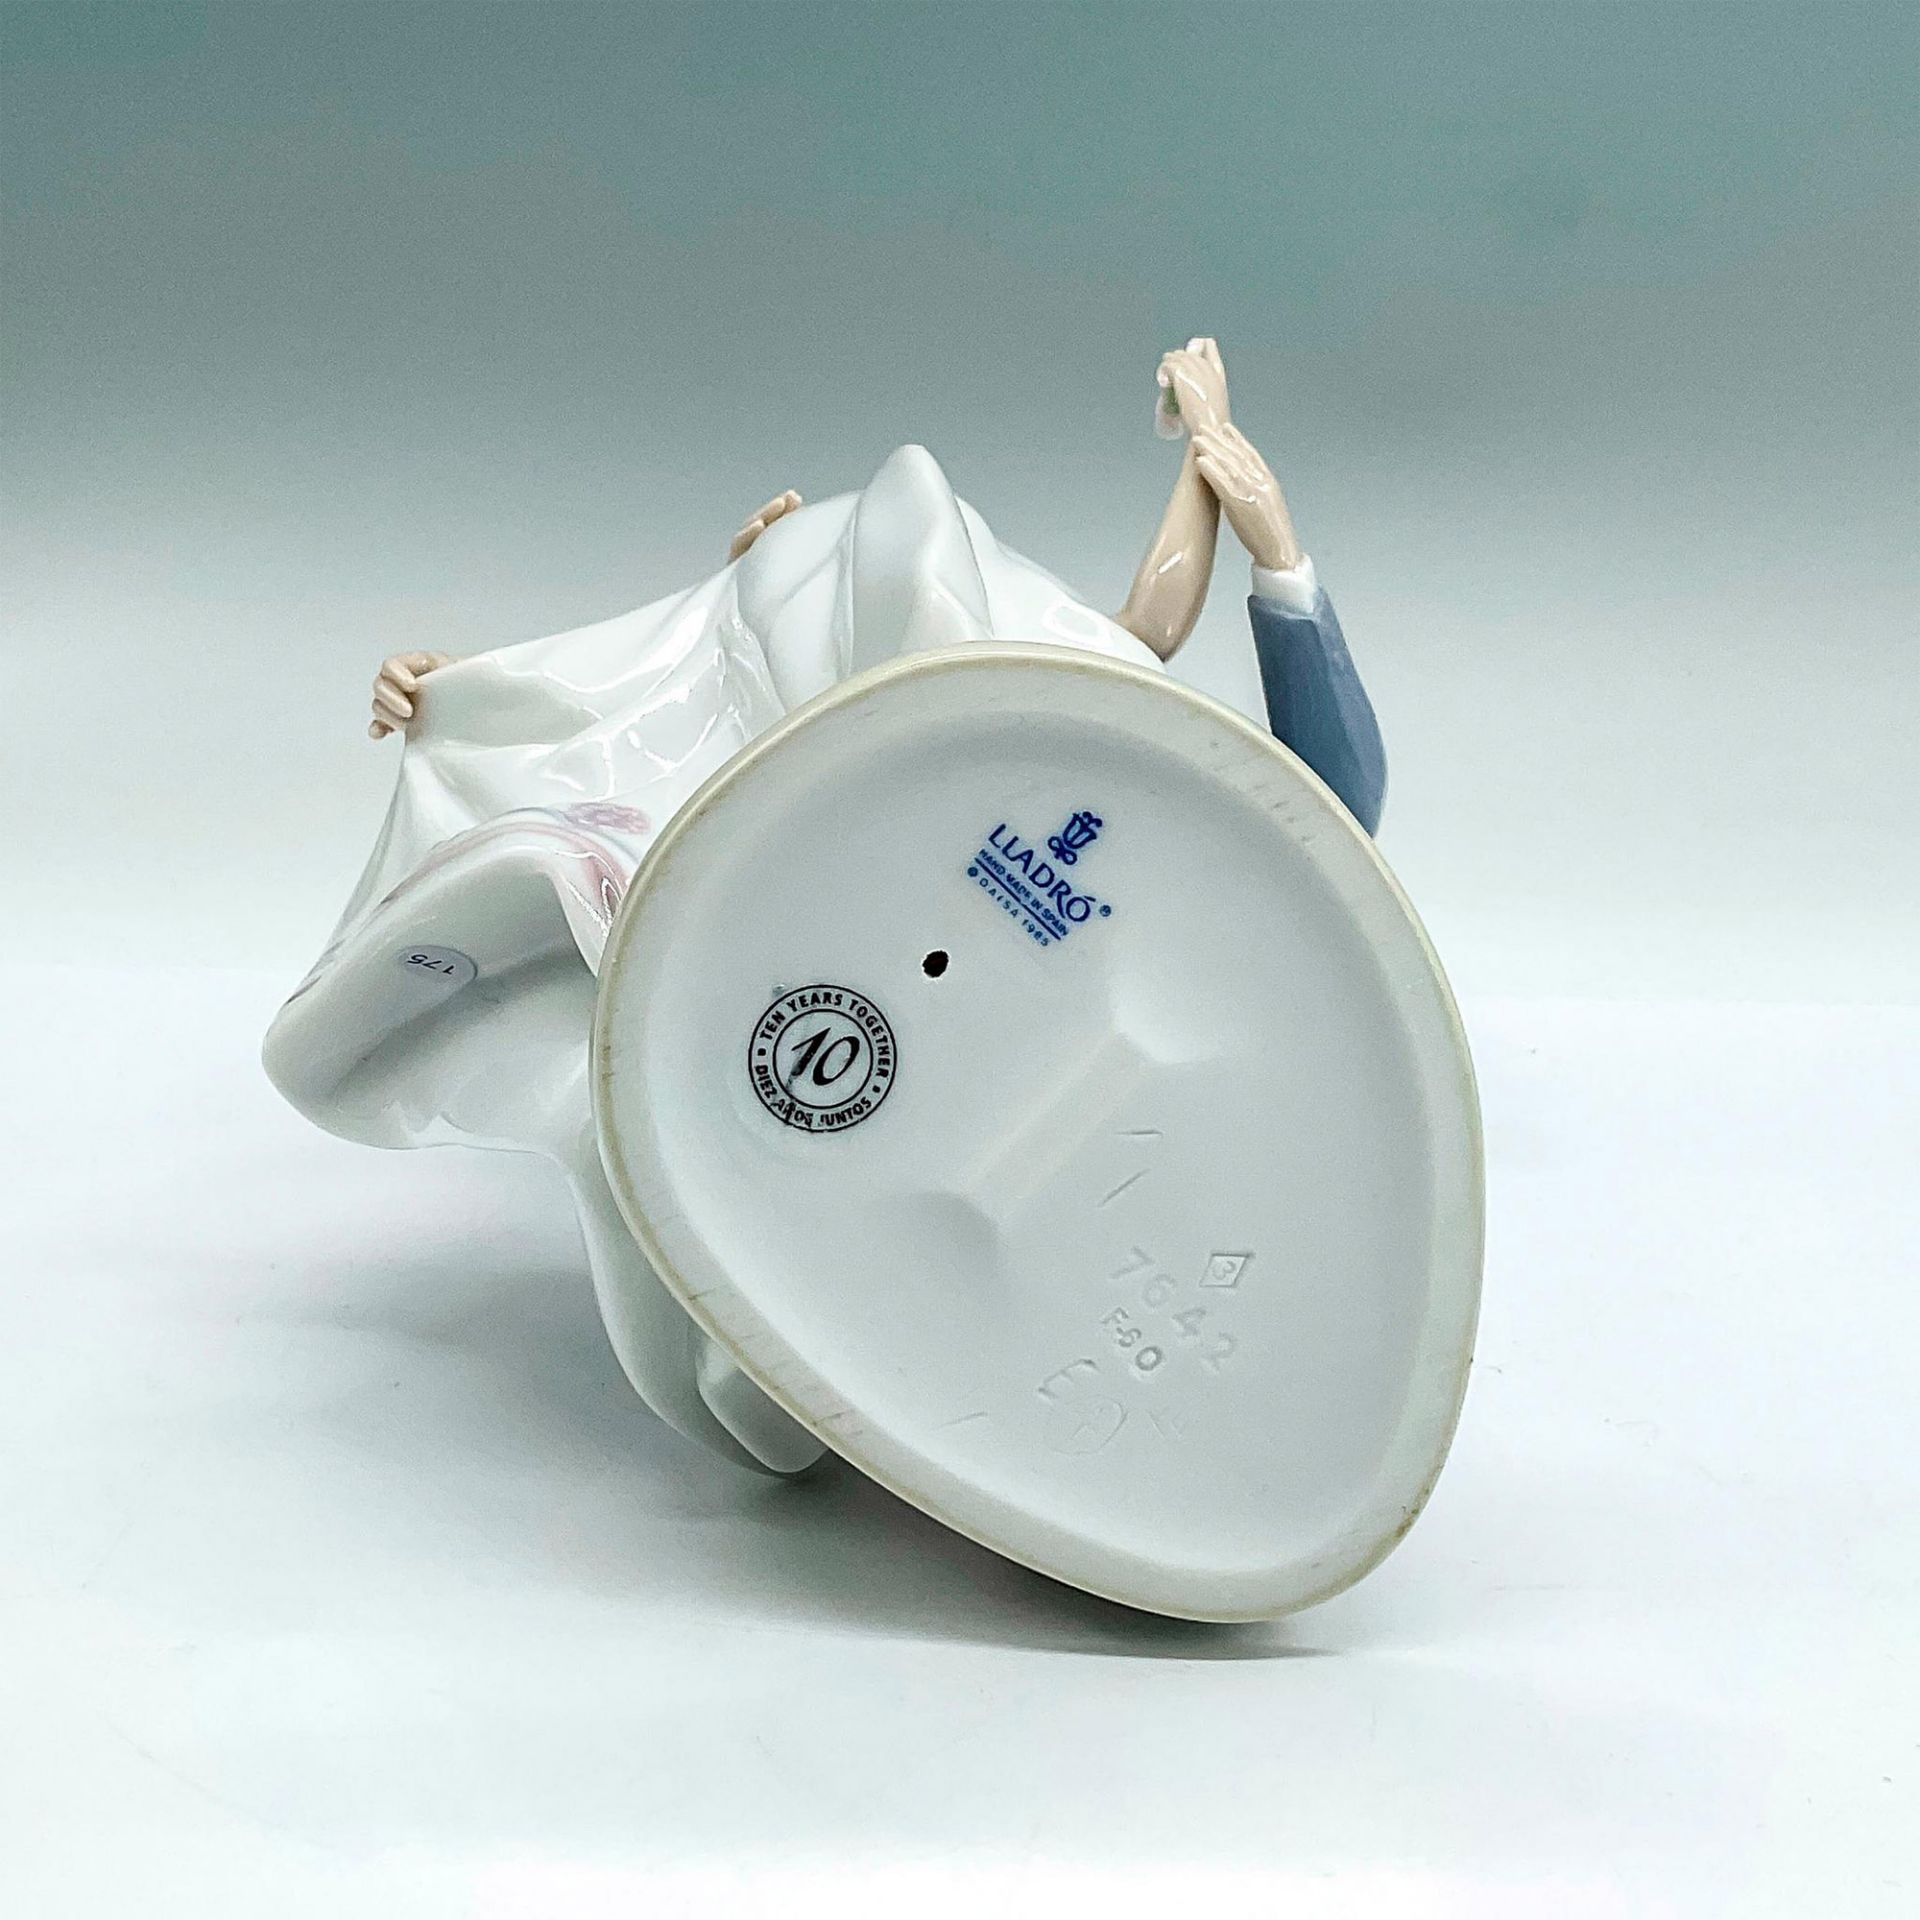 Now And Forever 1007642 - Lladro Porcelain Figurine - Image 3 of 3